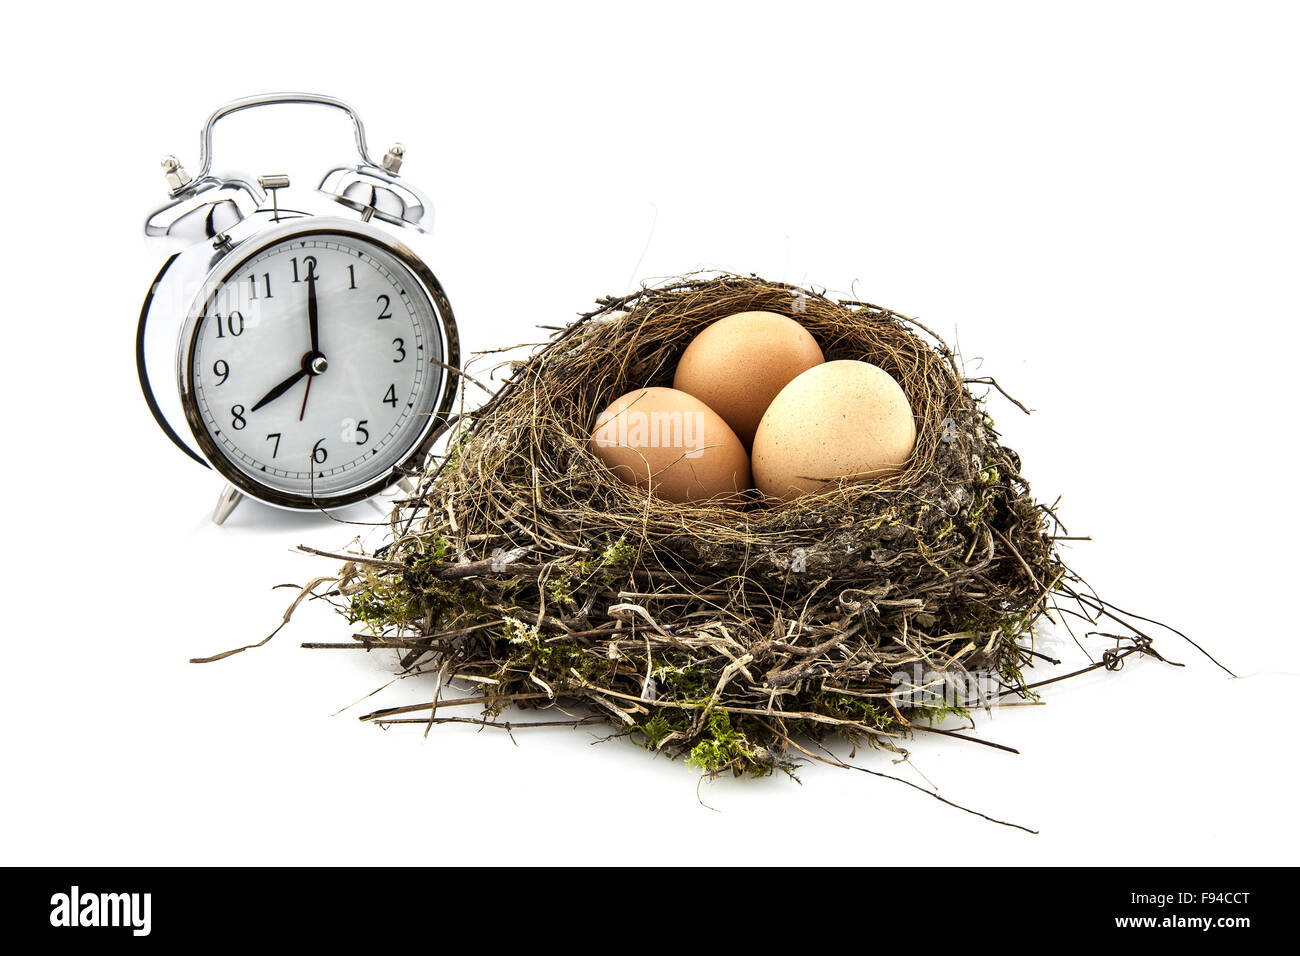 Bird nest with eggs and clock on white background Stock Photo